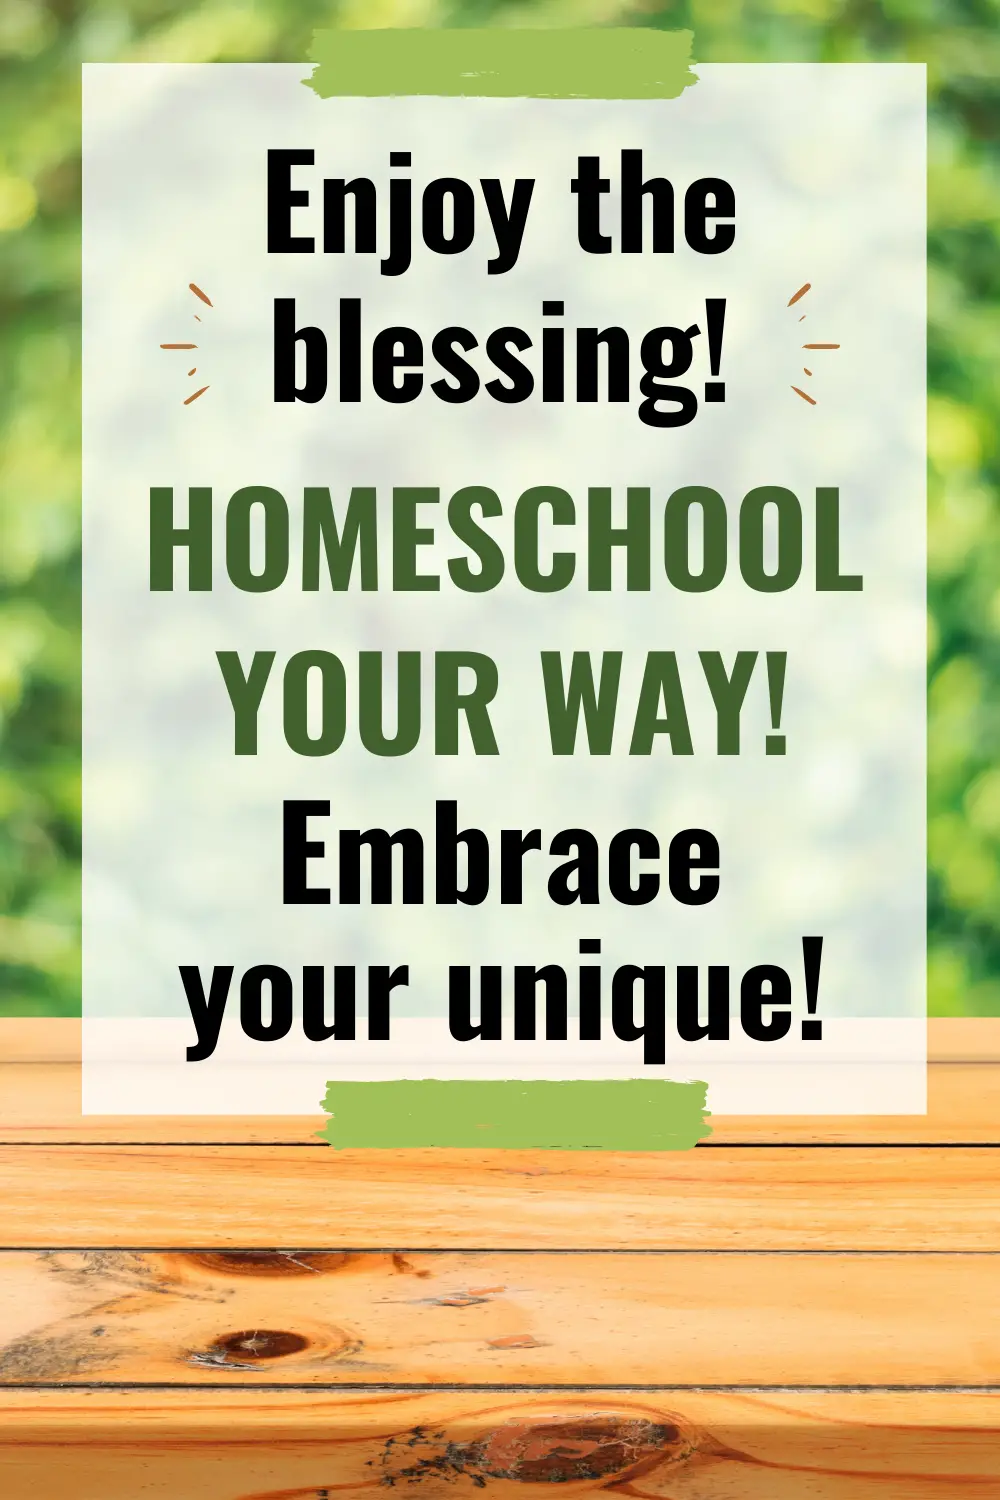 Do you homeschool or school-at-home? What's the best method? Find what works best for you, and embrace it. Enjoy homeschooling your way! 